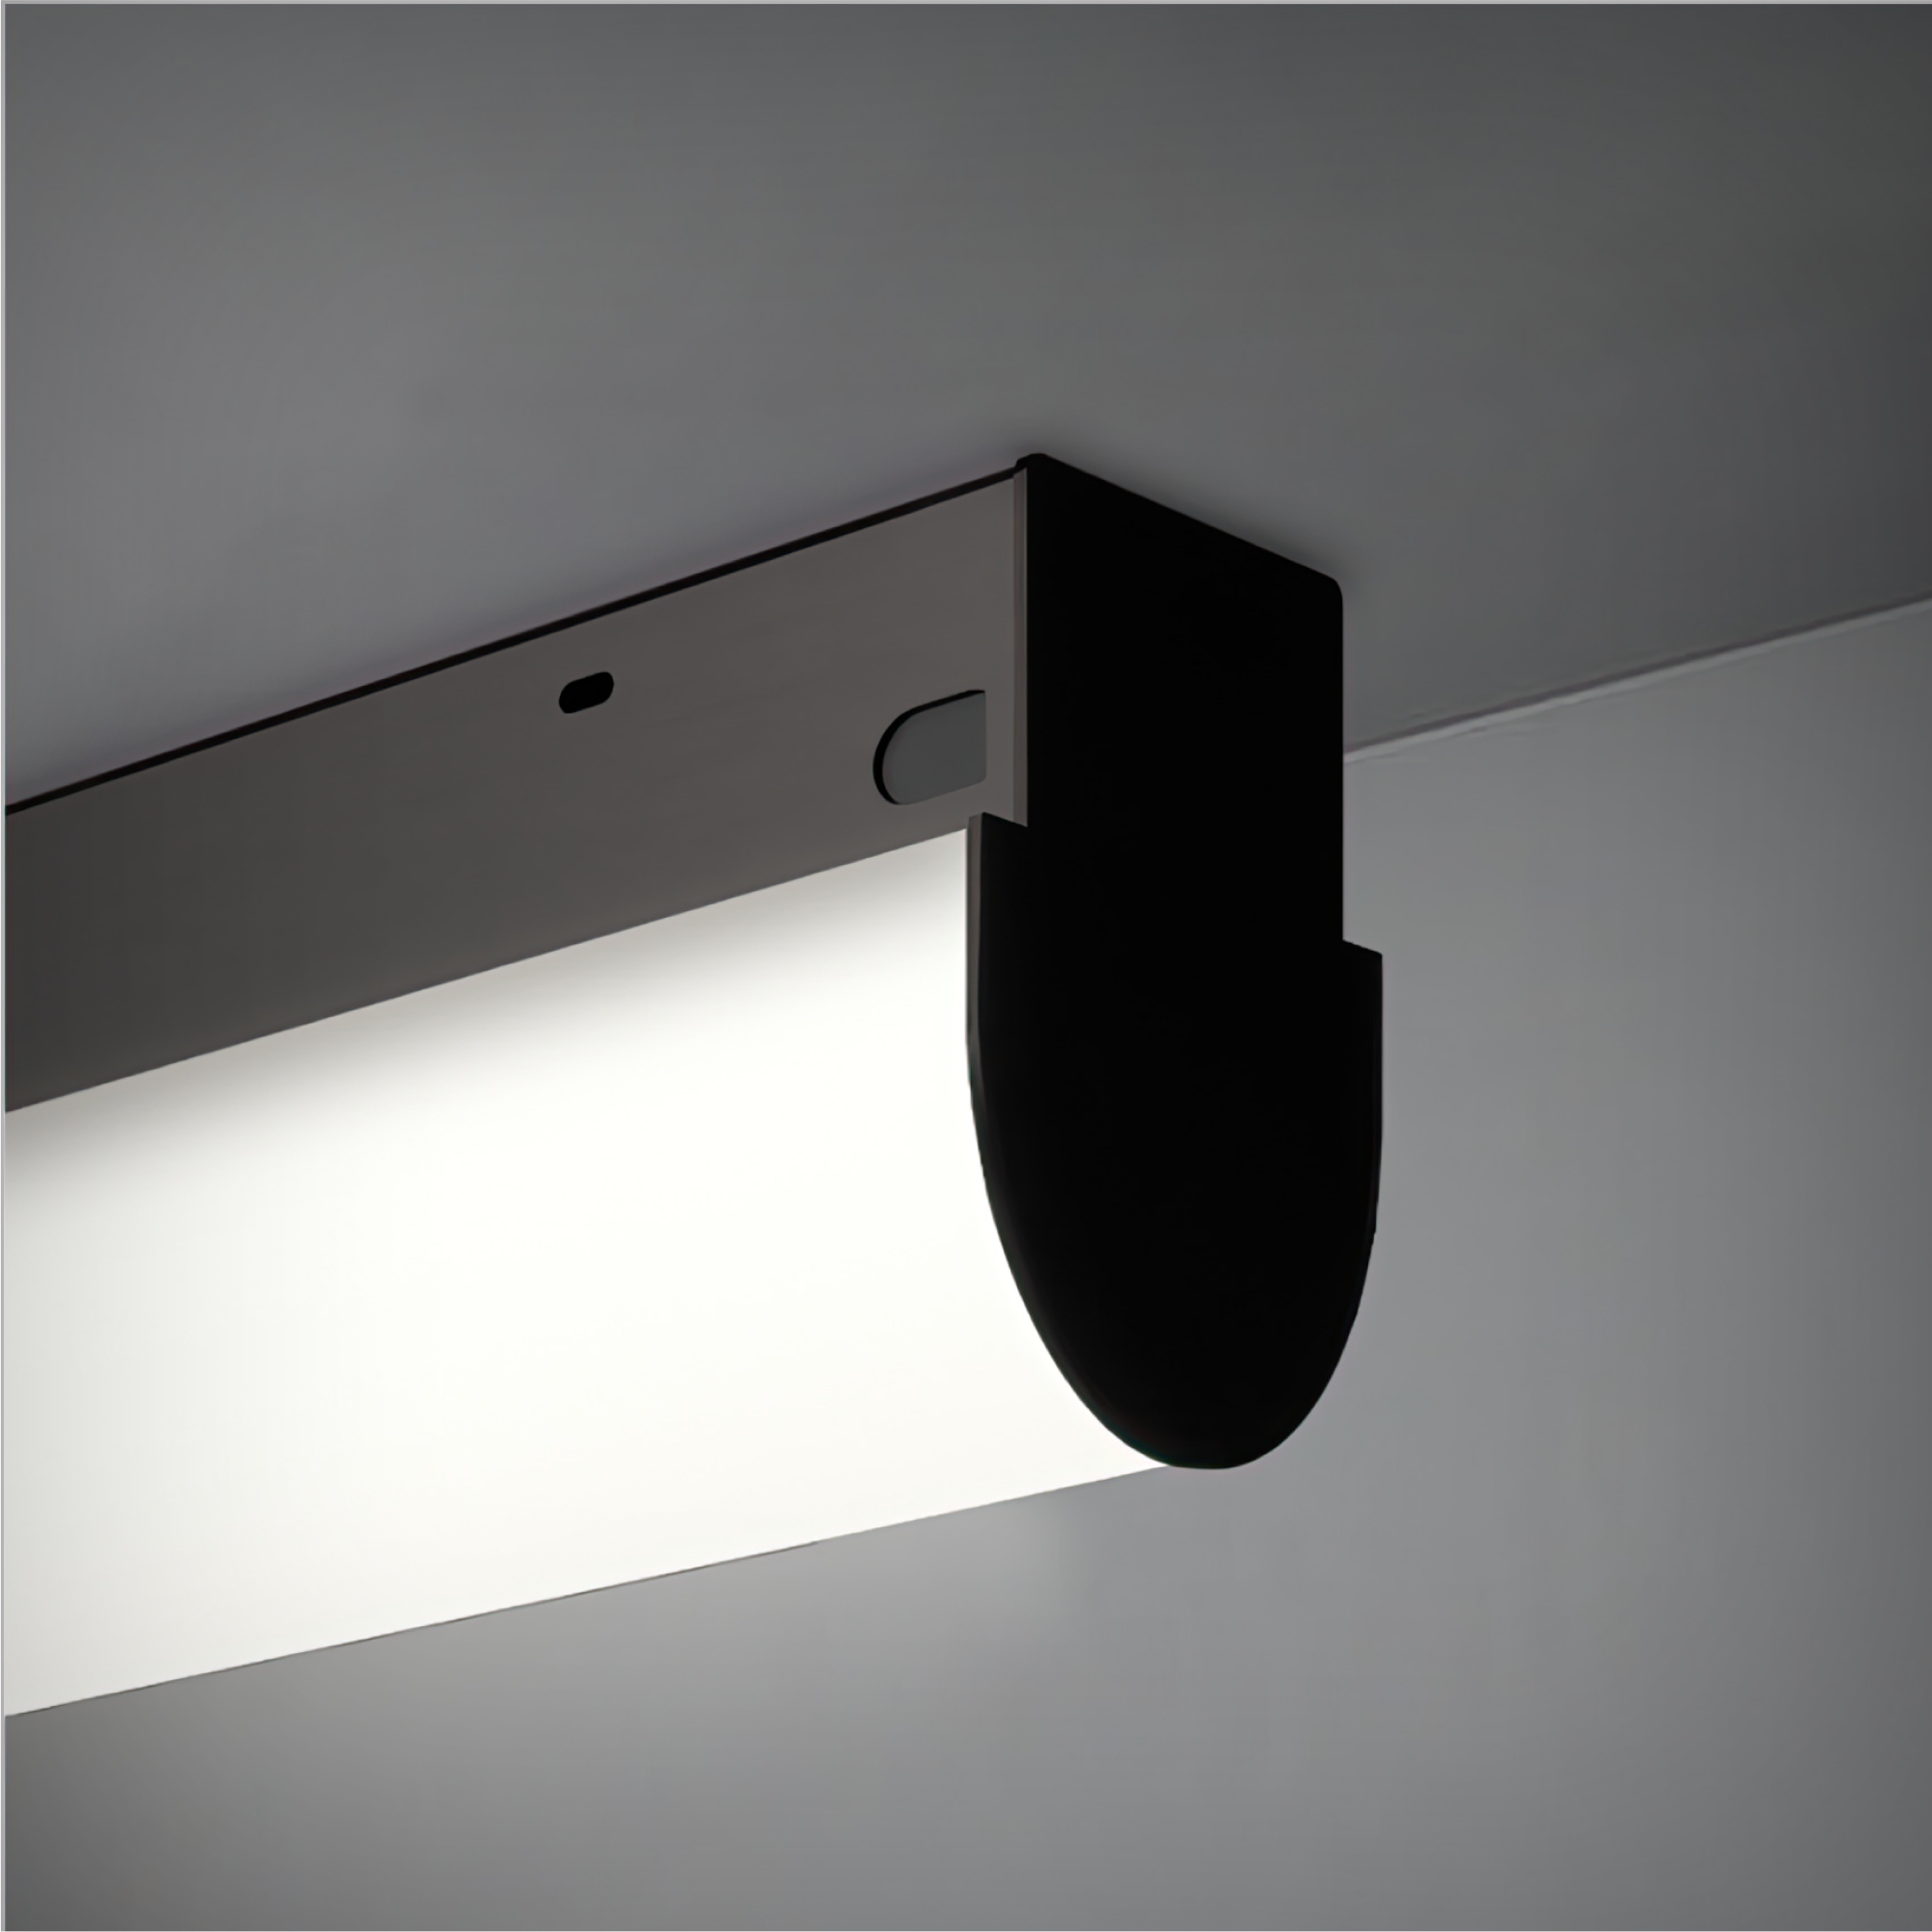 Wrapped Linear Hemisphere LED Surface Mount Light with a 2.75-Inch size